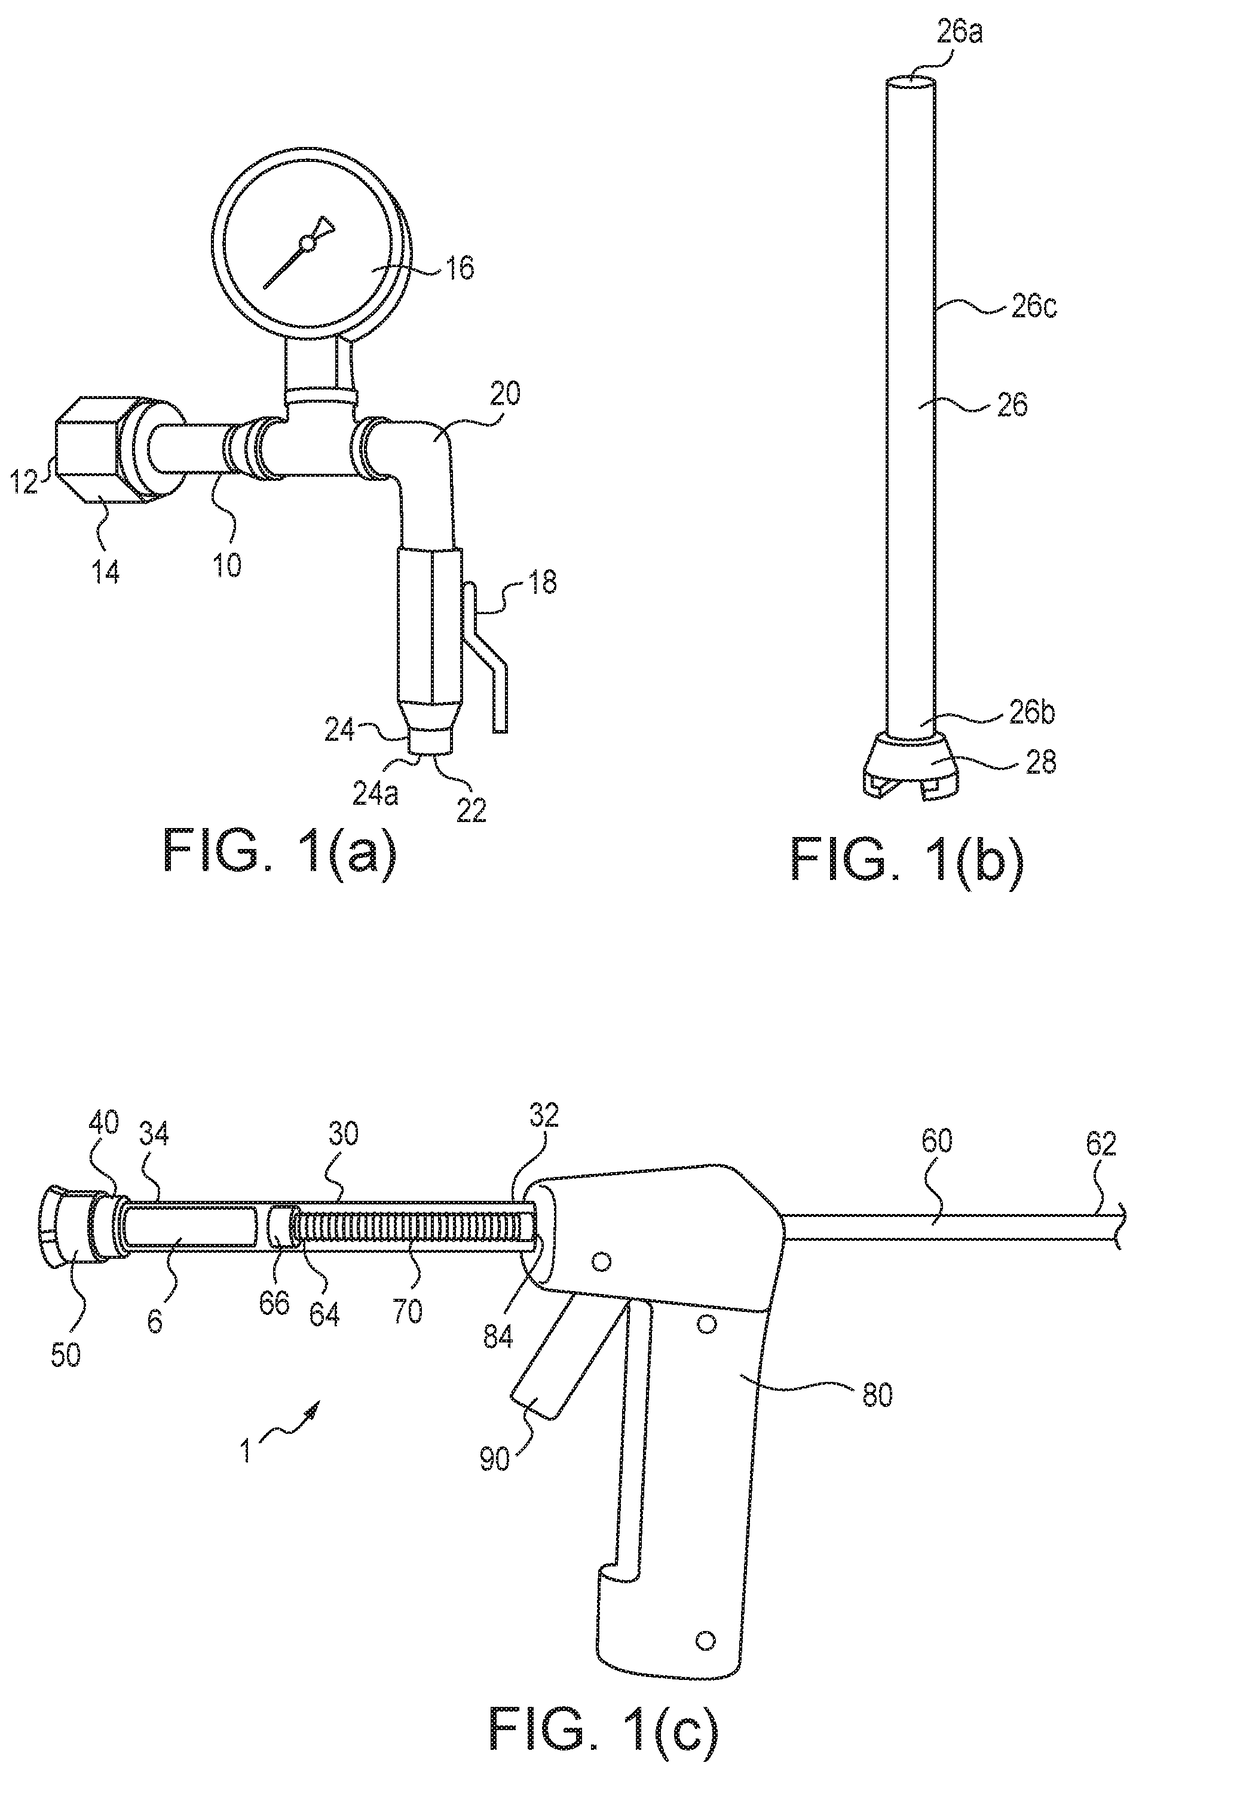 Cryotherapy Device For The Treatment of Cervical Precancerous Lesions